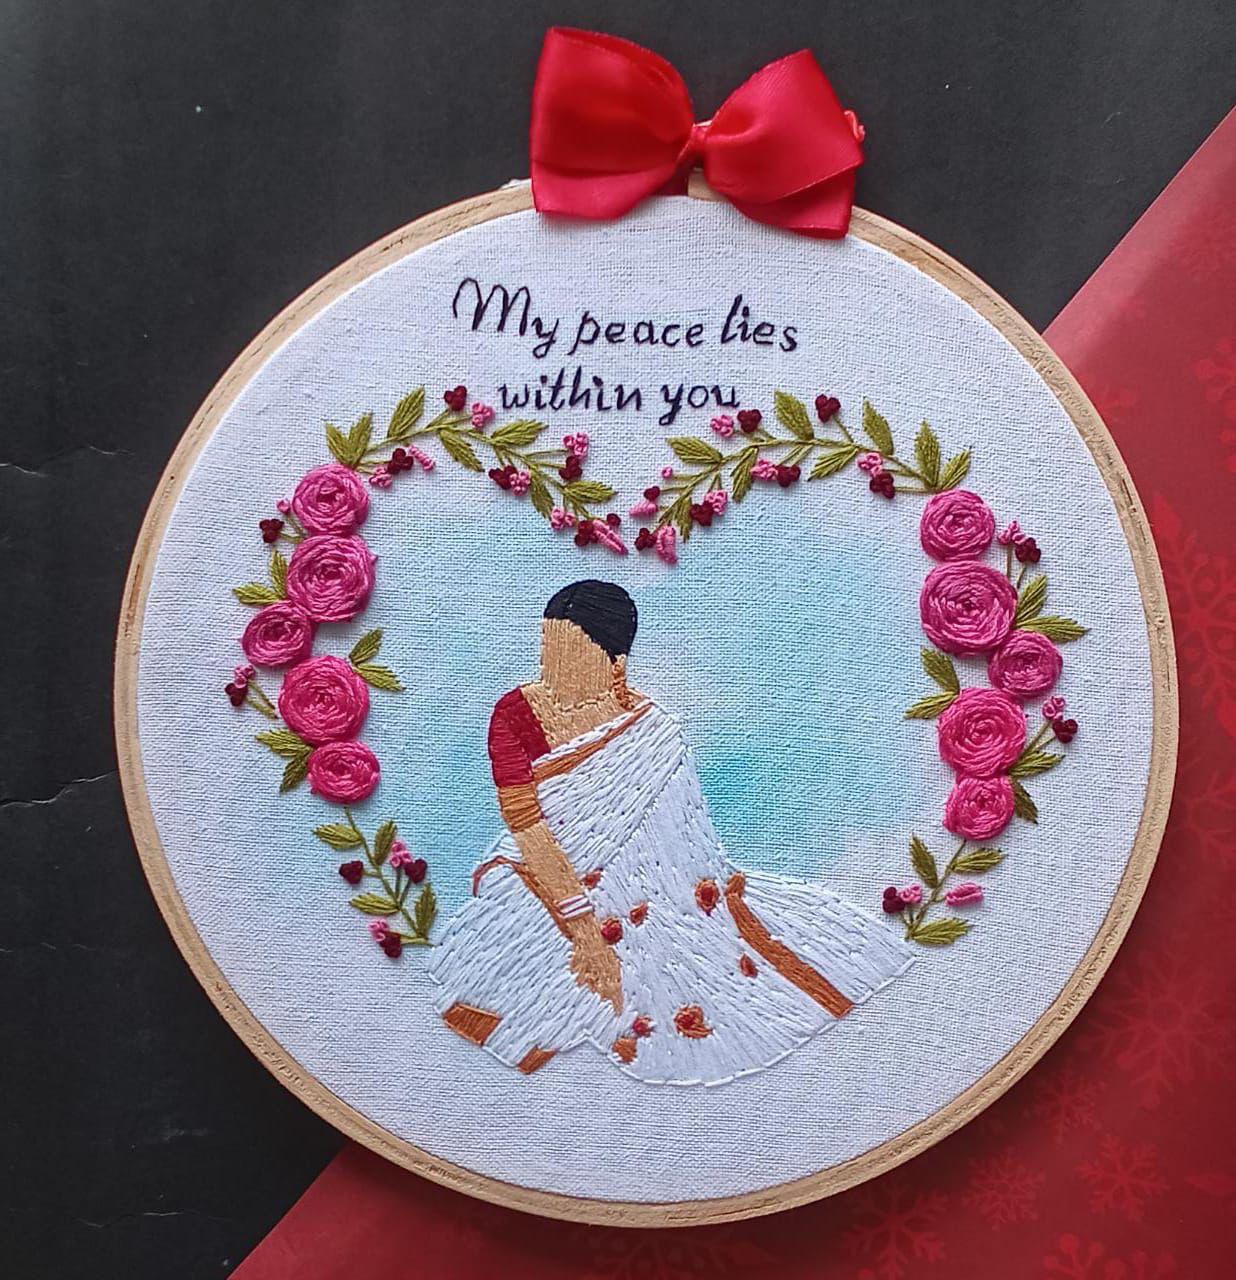 StitchCraft: Handcrafted Embroidery Hoop